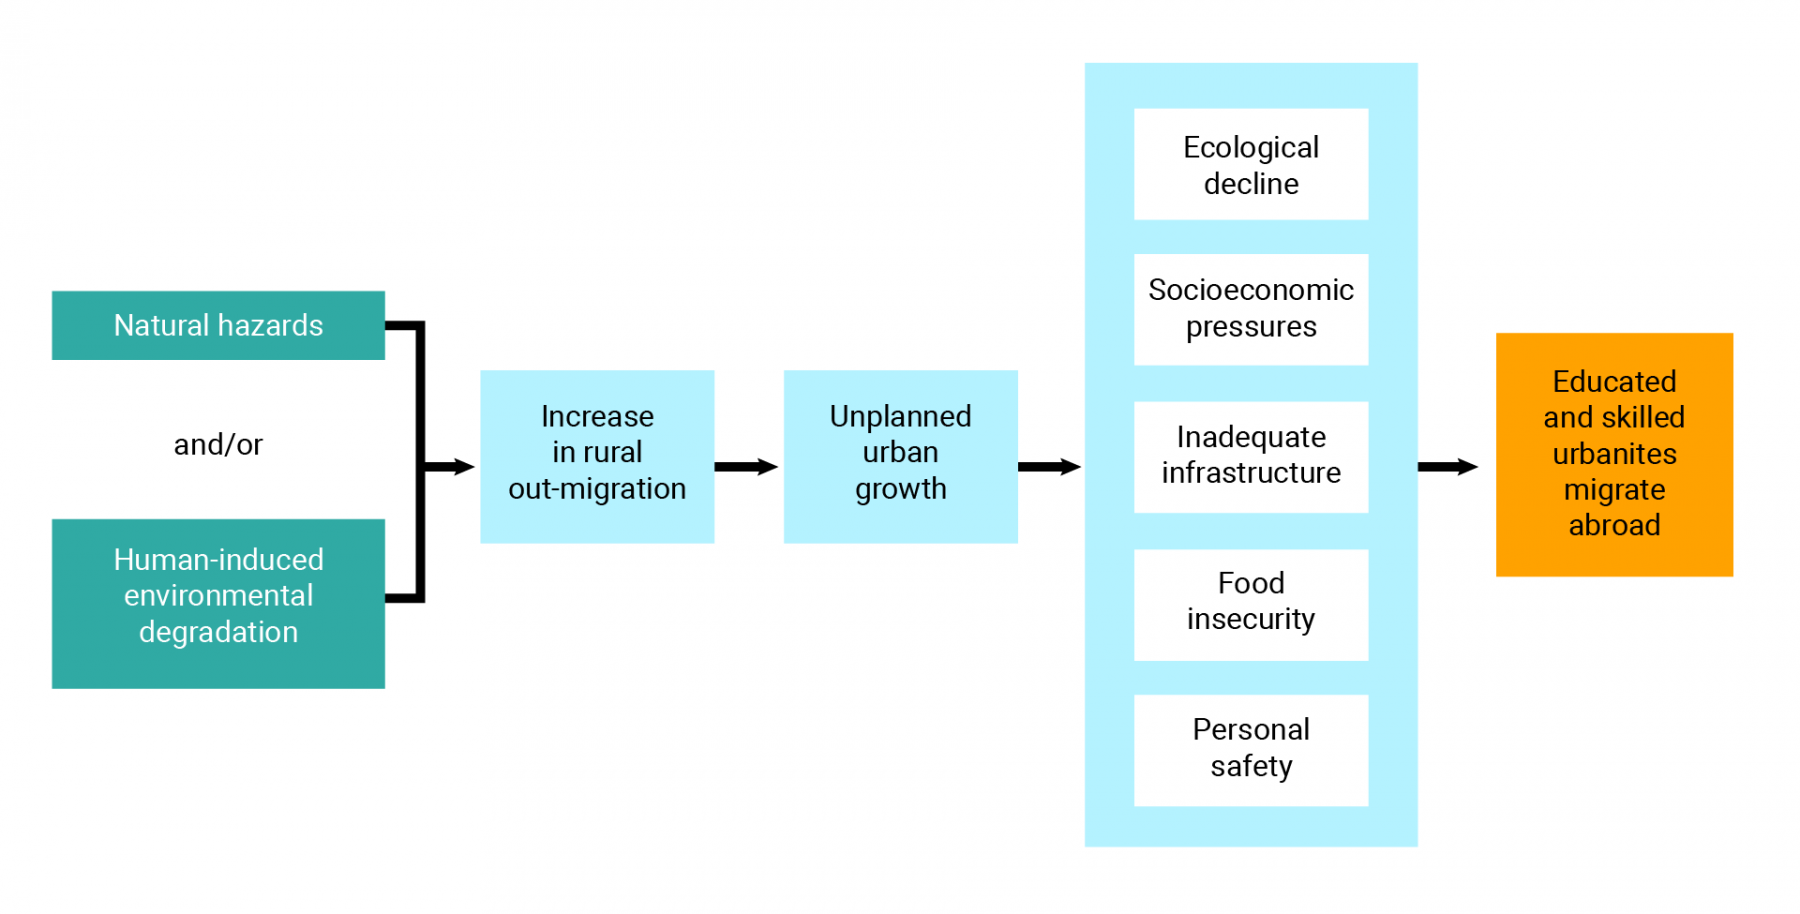 Figure of a flow chart showing how environmental impacts lead to migration. Natural and/or human-induced environmental degradation leads to increased rural out-migration and unplanned urban growth. This leads to ecological decline, socioeconomic pressures, inadequate infrastructure, food insecurity, and personal safety issues, which leads educated and skilled urbanites to migrate abroad.